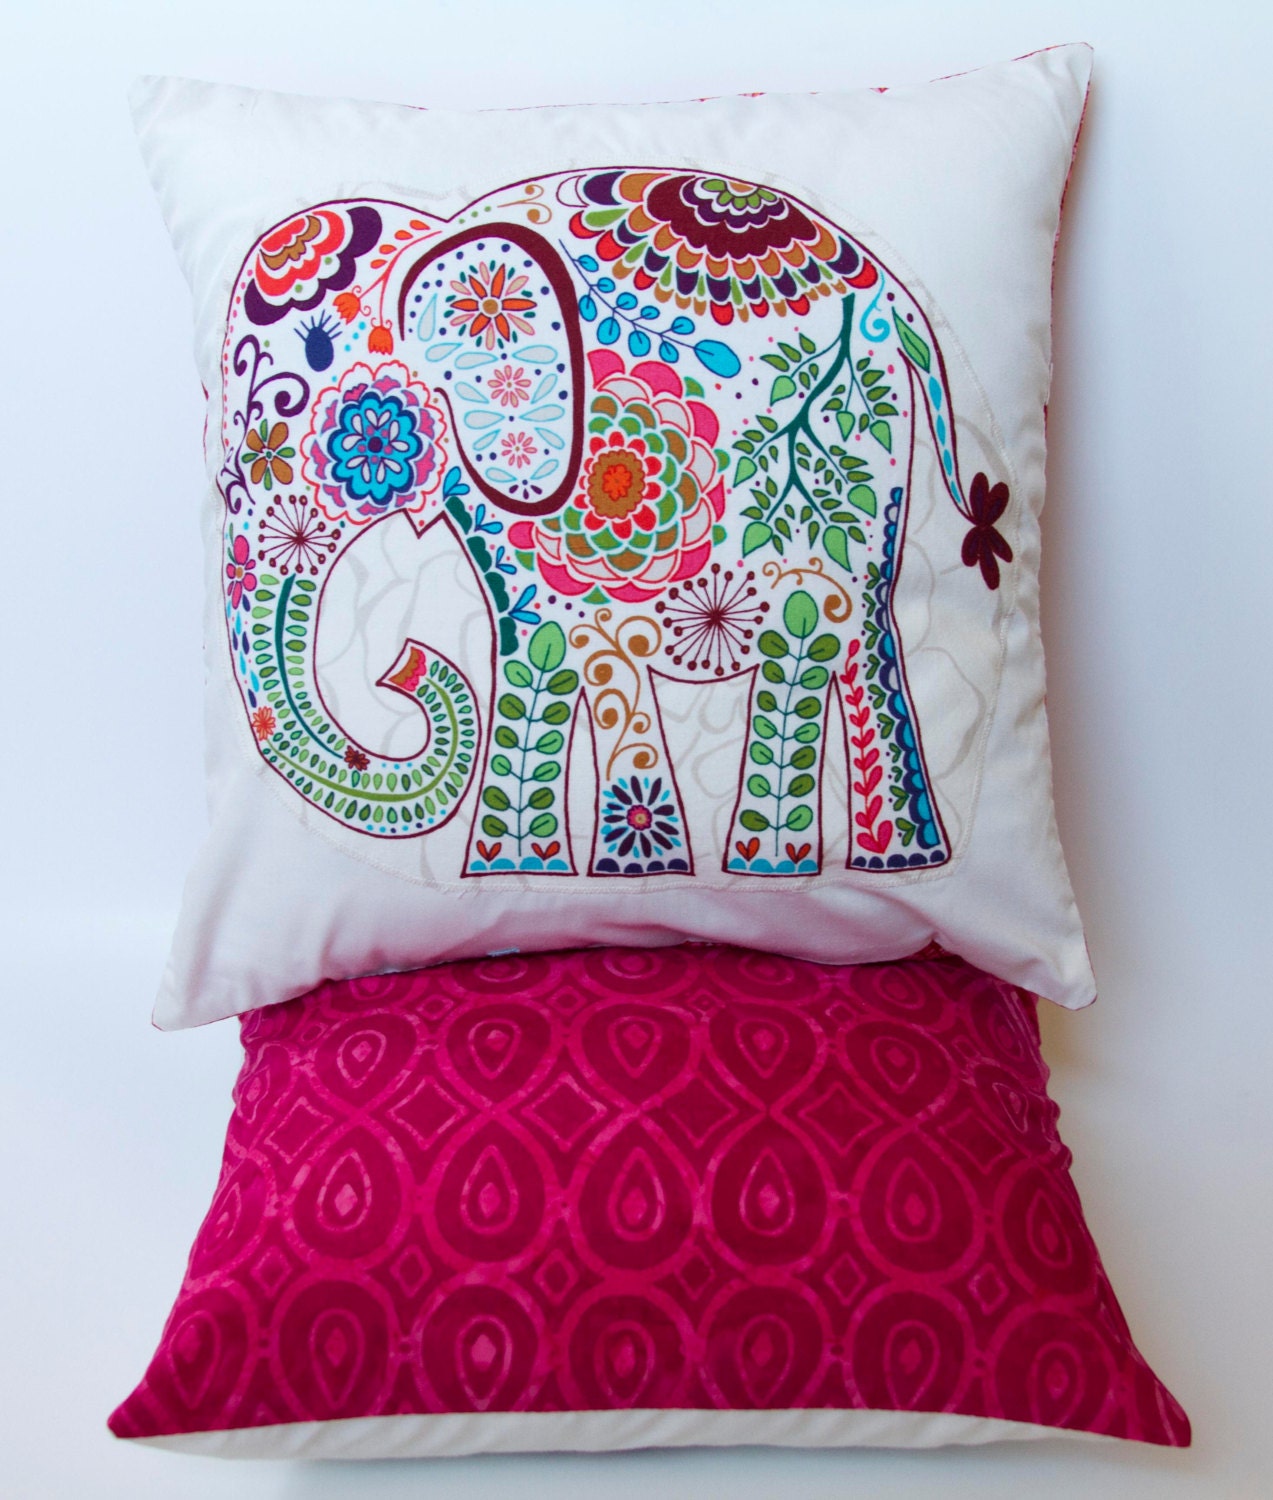 Bright Pink Elephant Pillow 12x12 Decorative by TinyWhineyShop